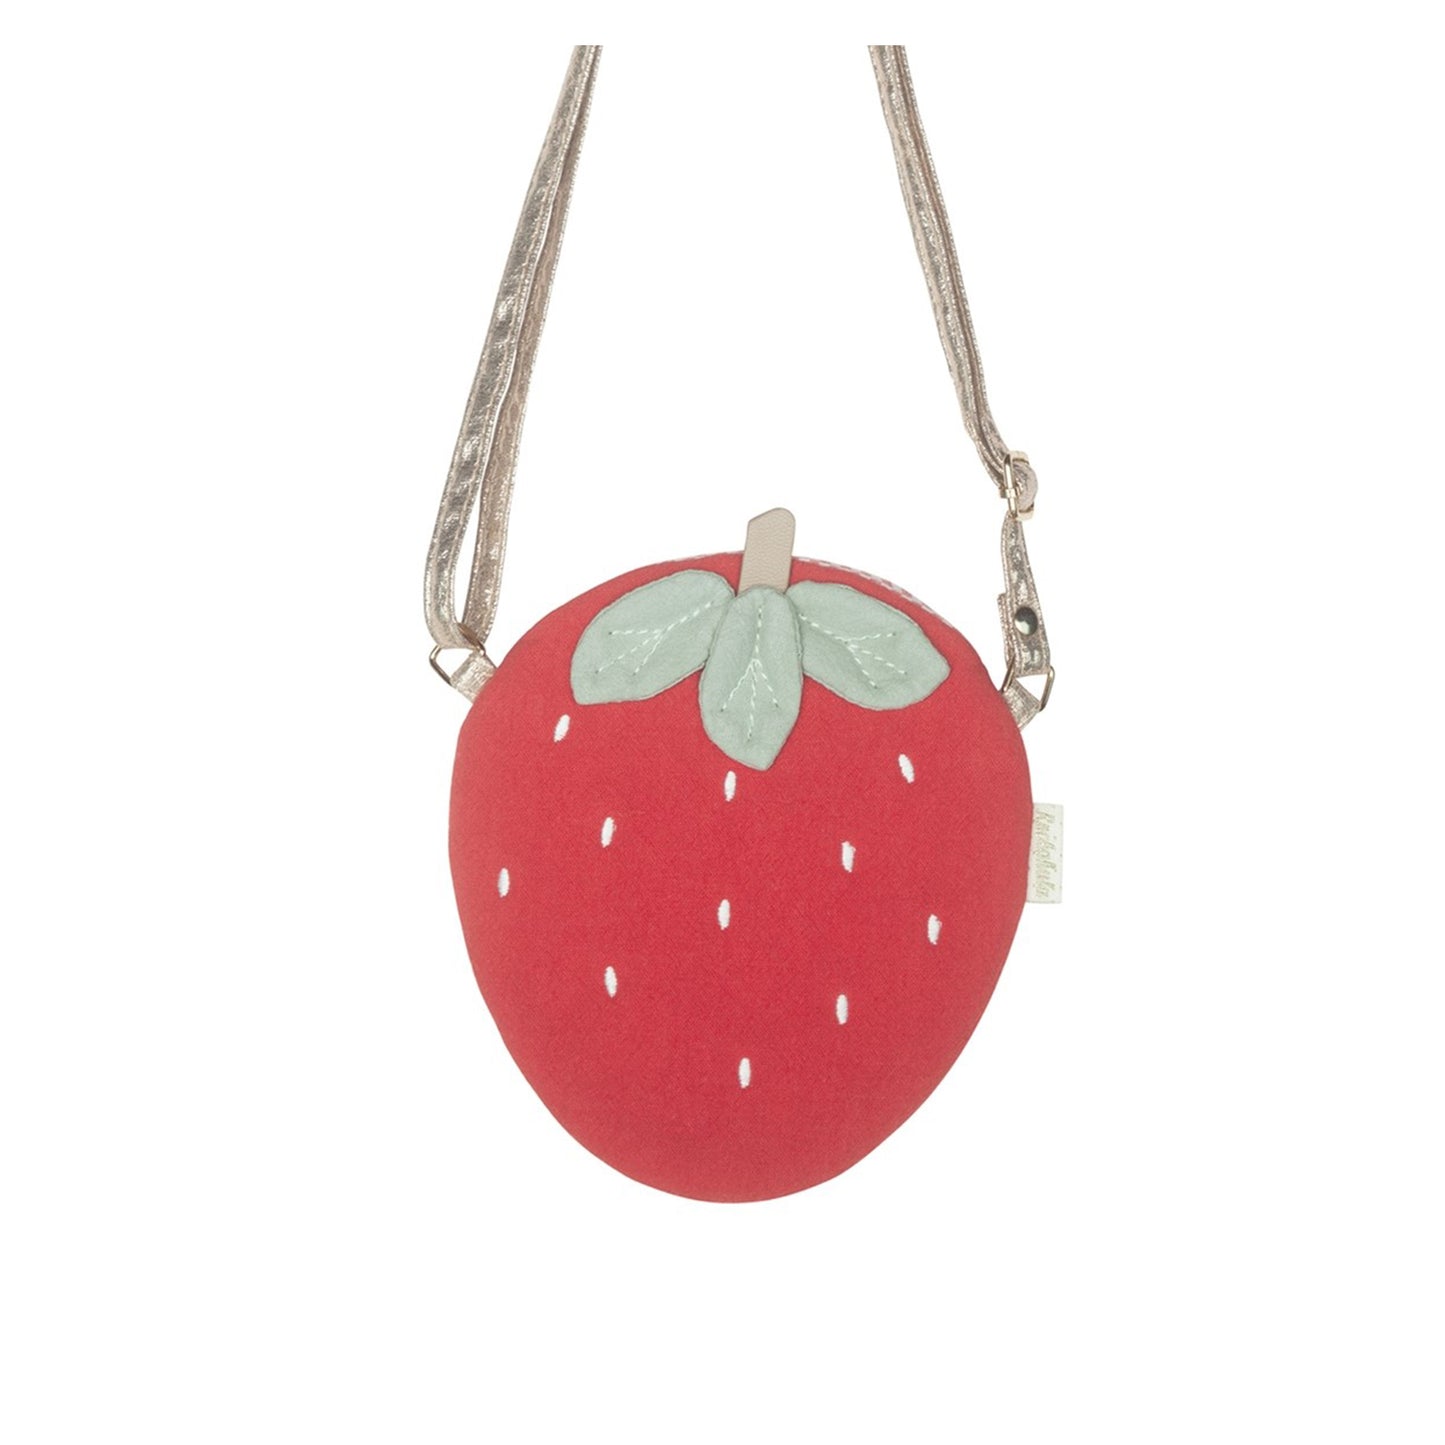 Strawberry Purse - add to cart w/ any strawberry shortcake collection item for 30% off